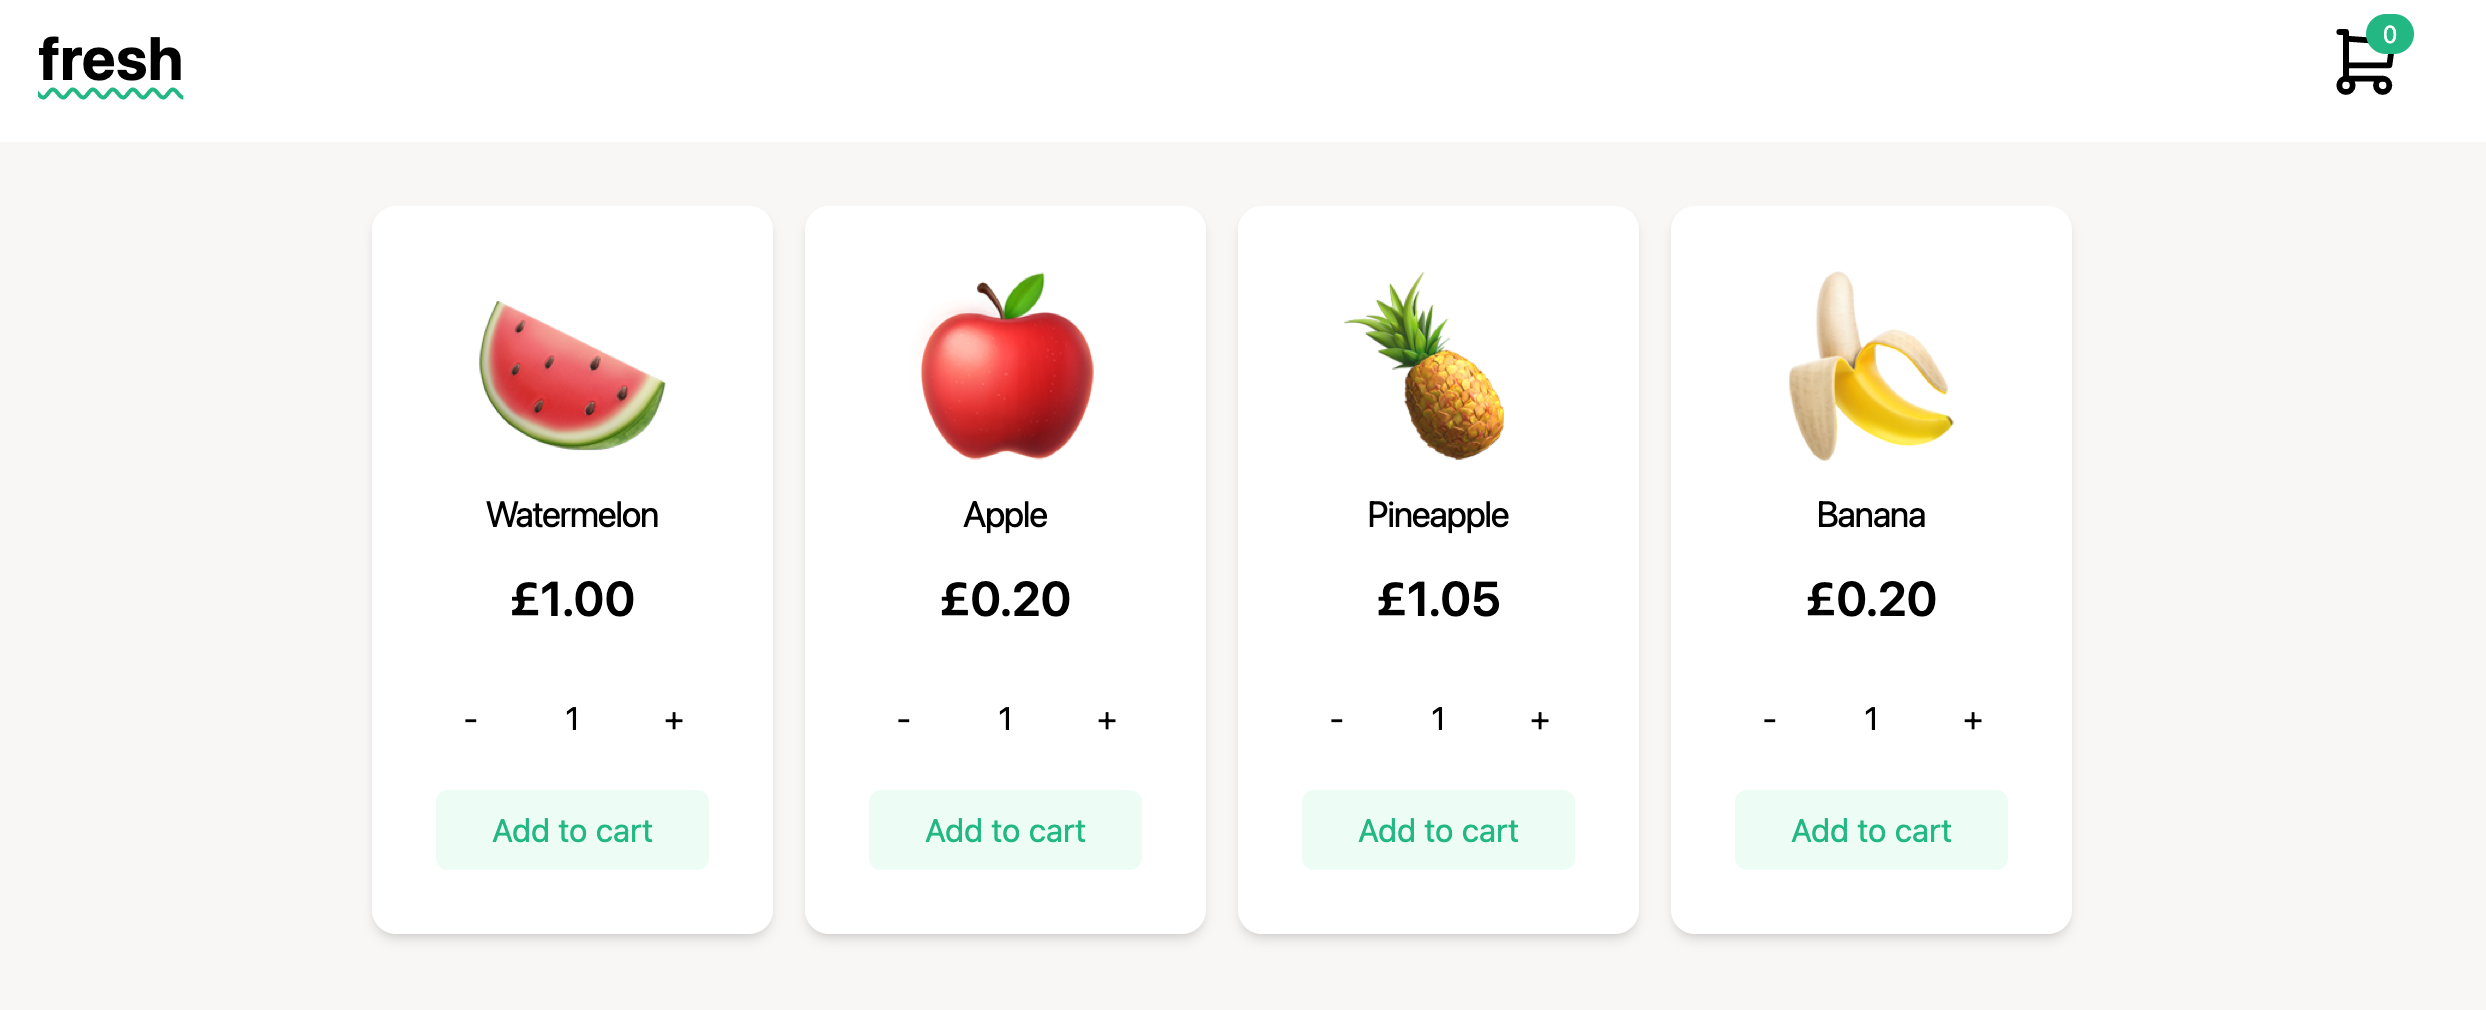 A screenshot of the fruit shop. Now the prices of the products are displaying correctly: 1.00, 0.20, 1.05, 0.20